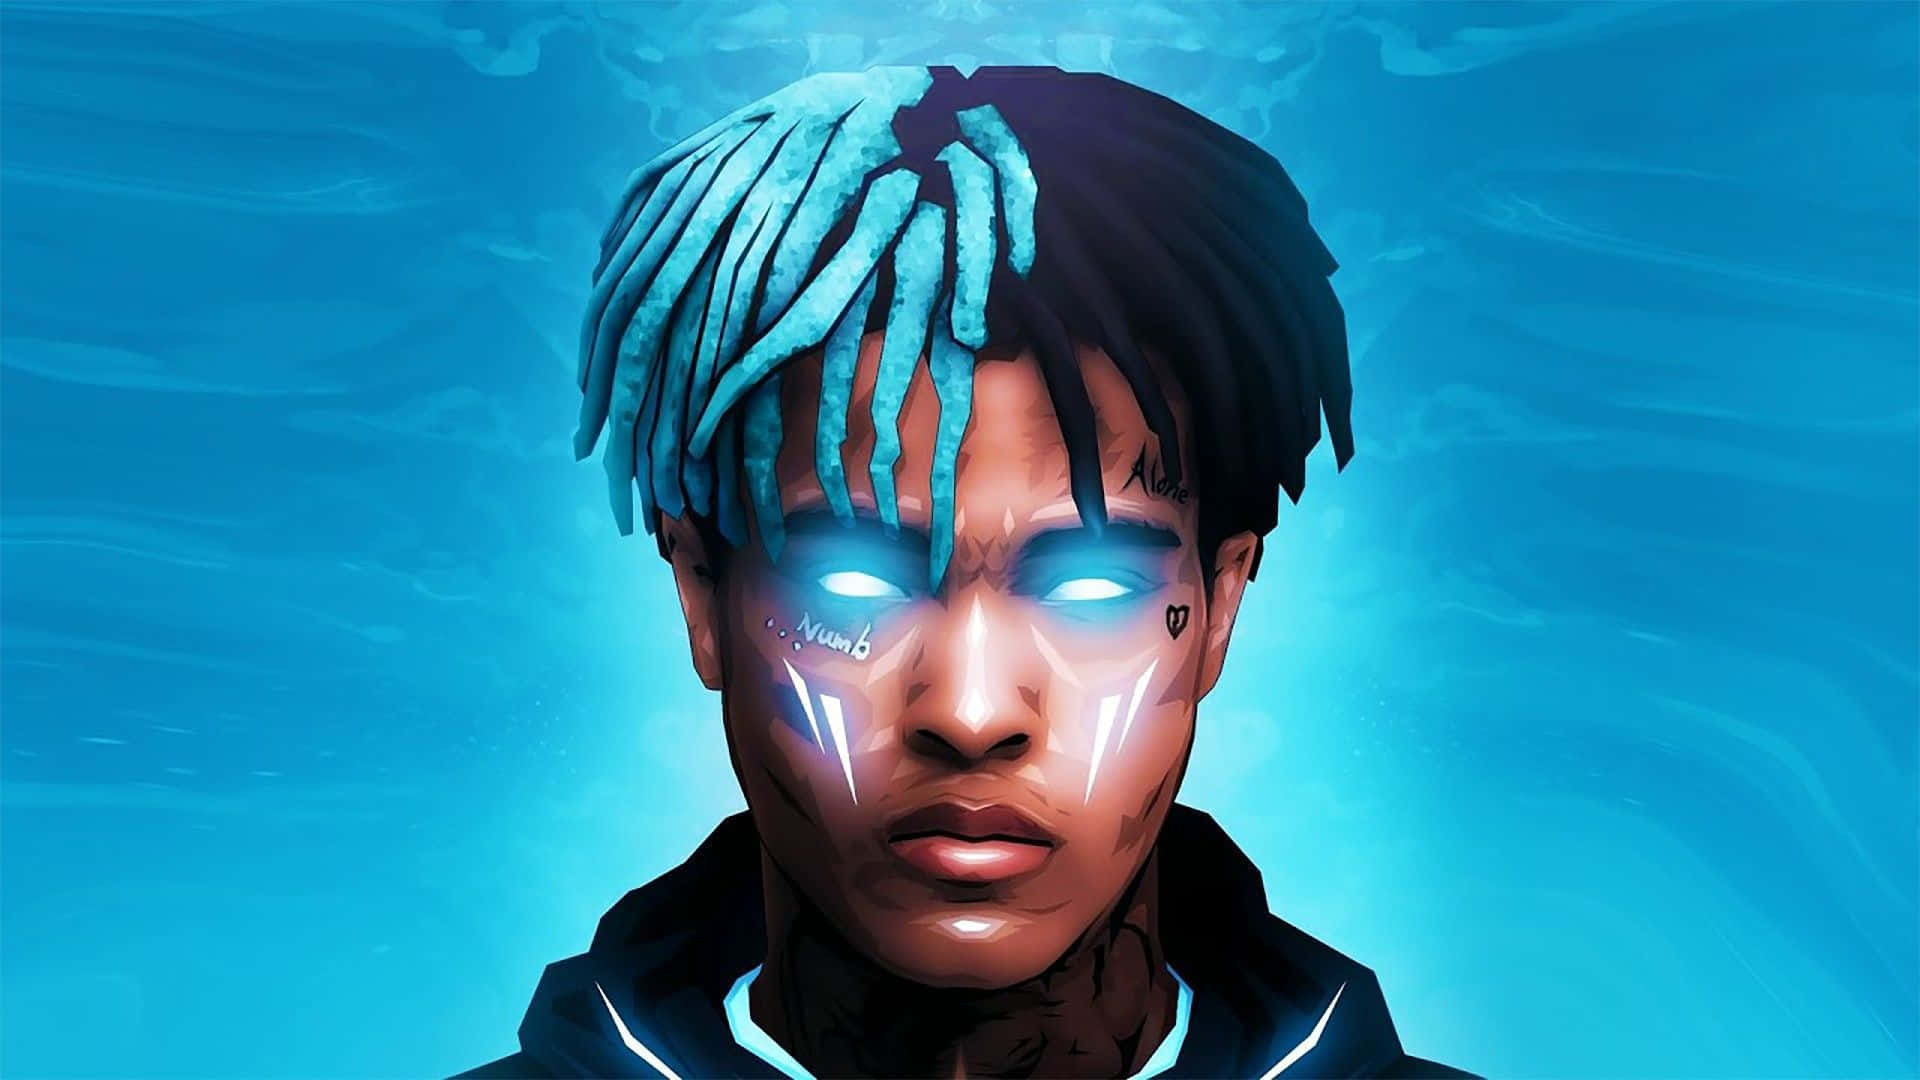 XXXTentacion with his iconic blue hair Wallpaper